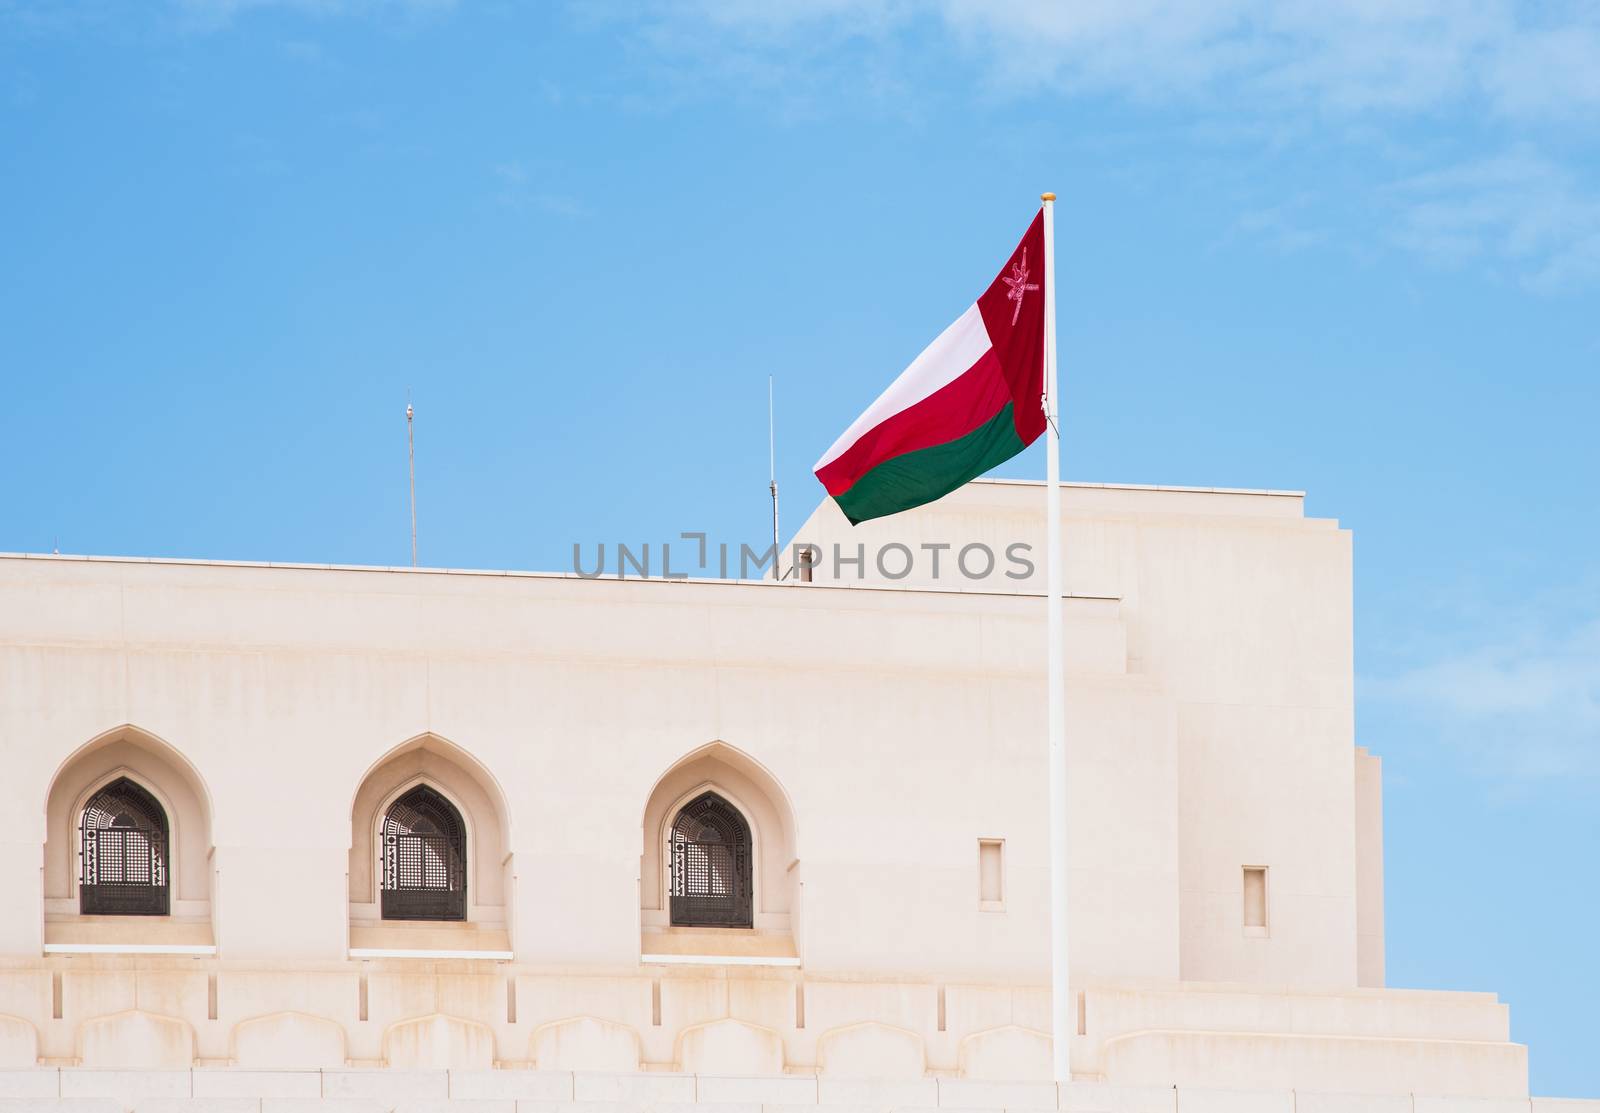 The flag of Oman by epixx